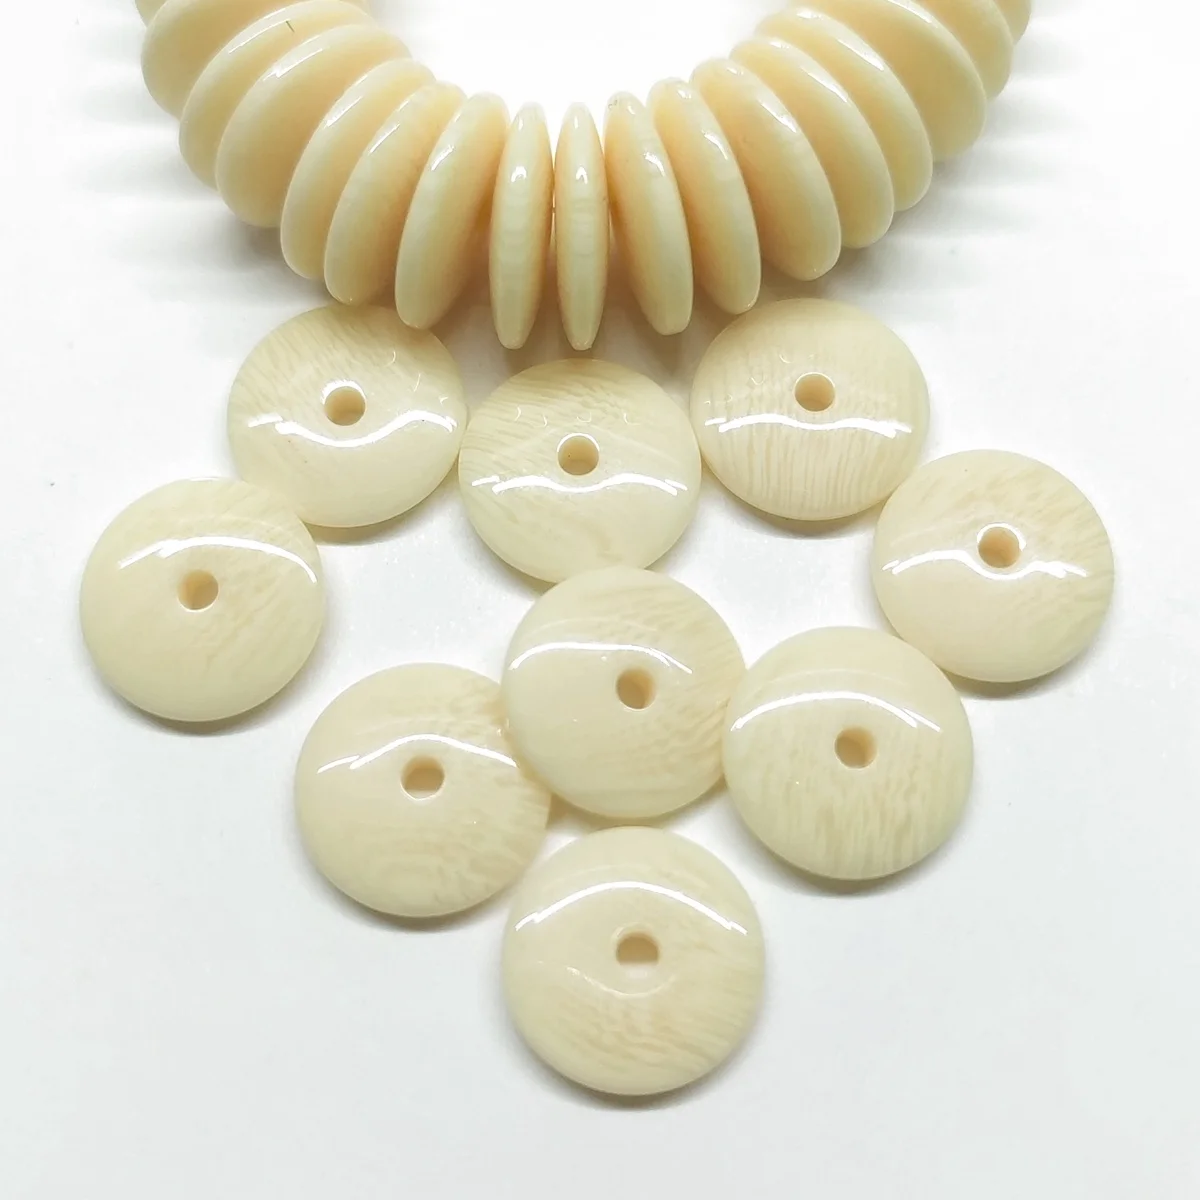 100pcs Beige Flat Round Resin Resin Imitation Ivory 6mm 8mm 10mm 12mm Loose Spacer Beads Wholesale lot for Jewelry Making 100pcs beige flat round resin resin imitation ivory 6mm 8mm 10mm 12mm loose spacer beads wholesale lot for jewelry making